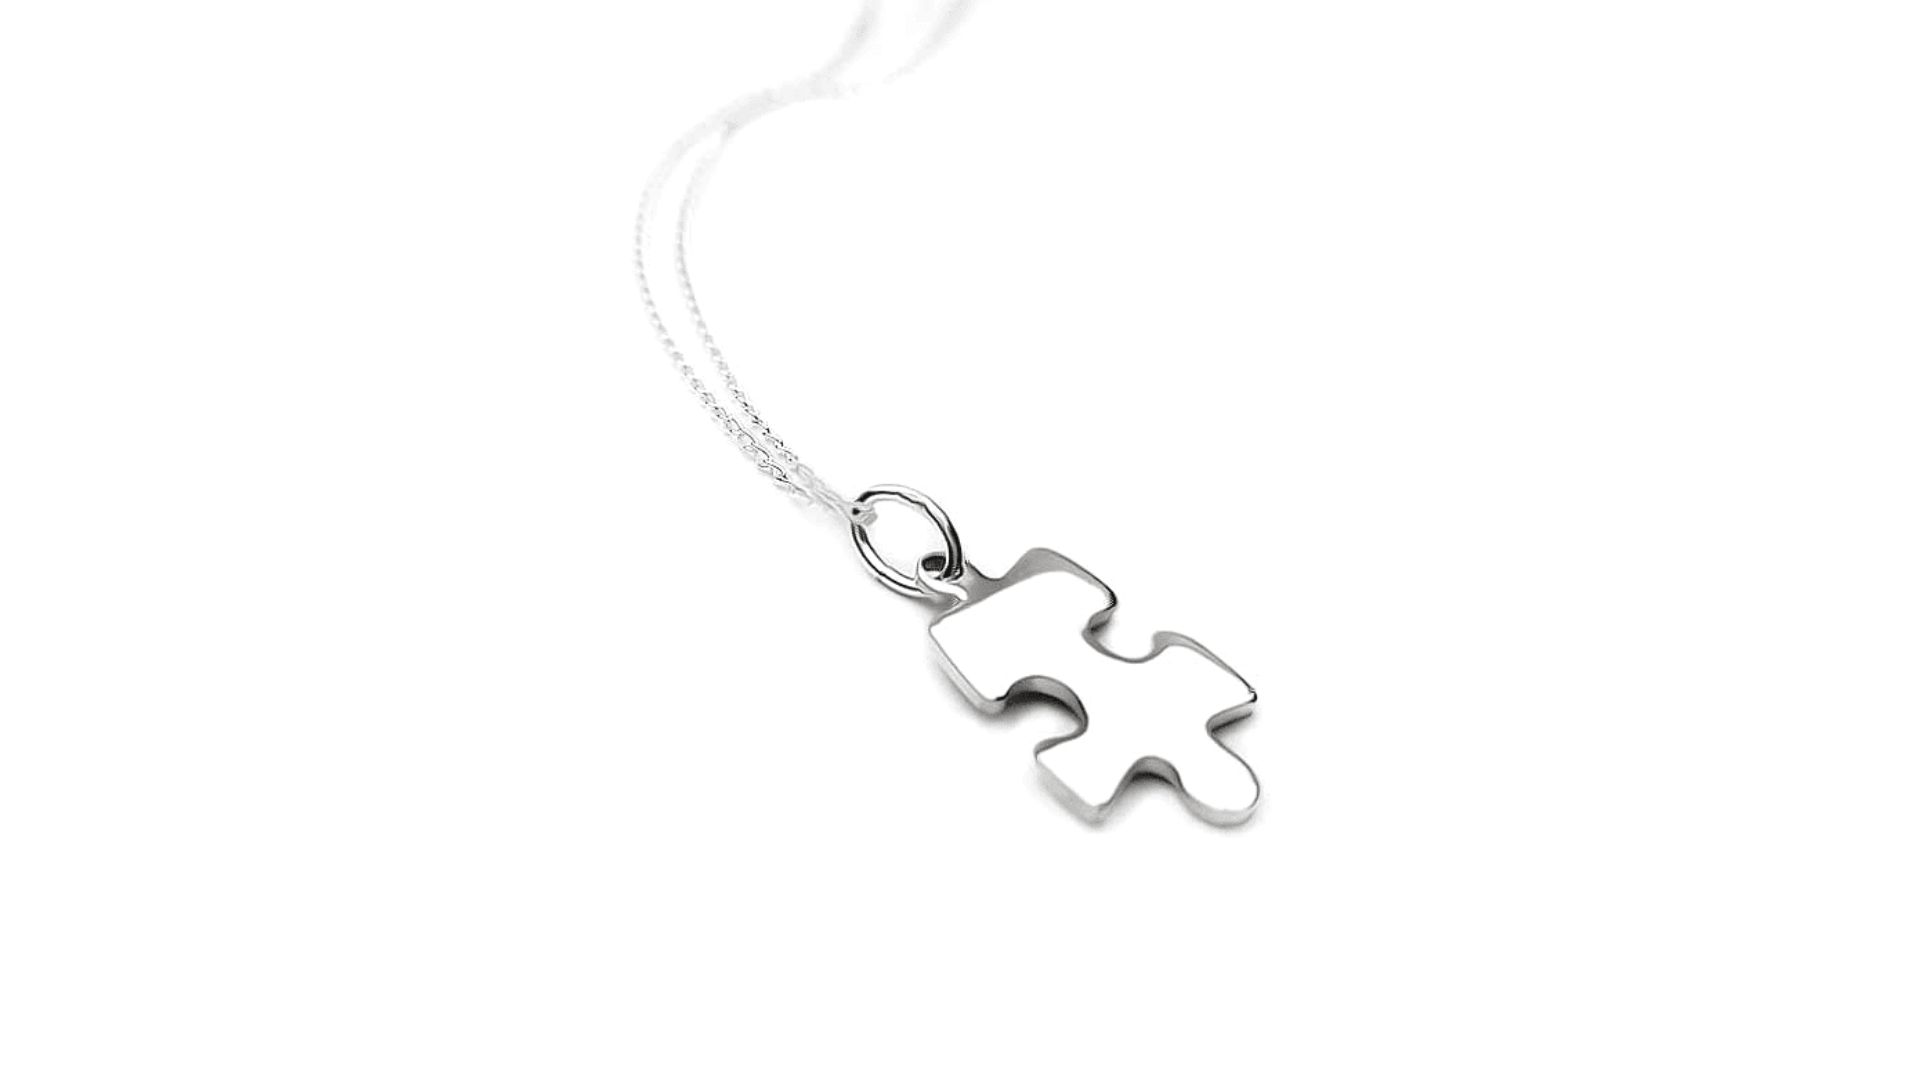 Top Collection Of Puzzle Piece Pendants For Best Friends